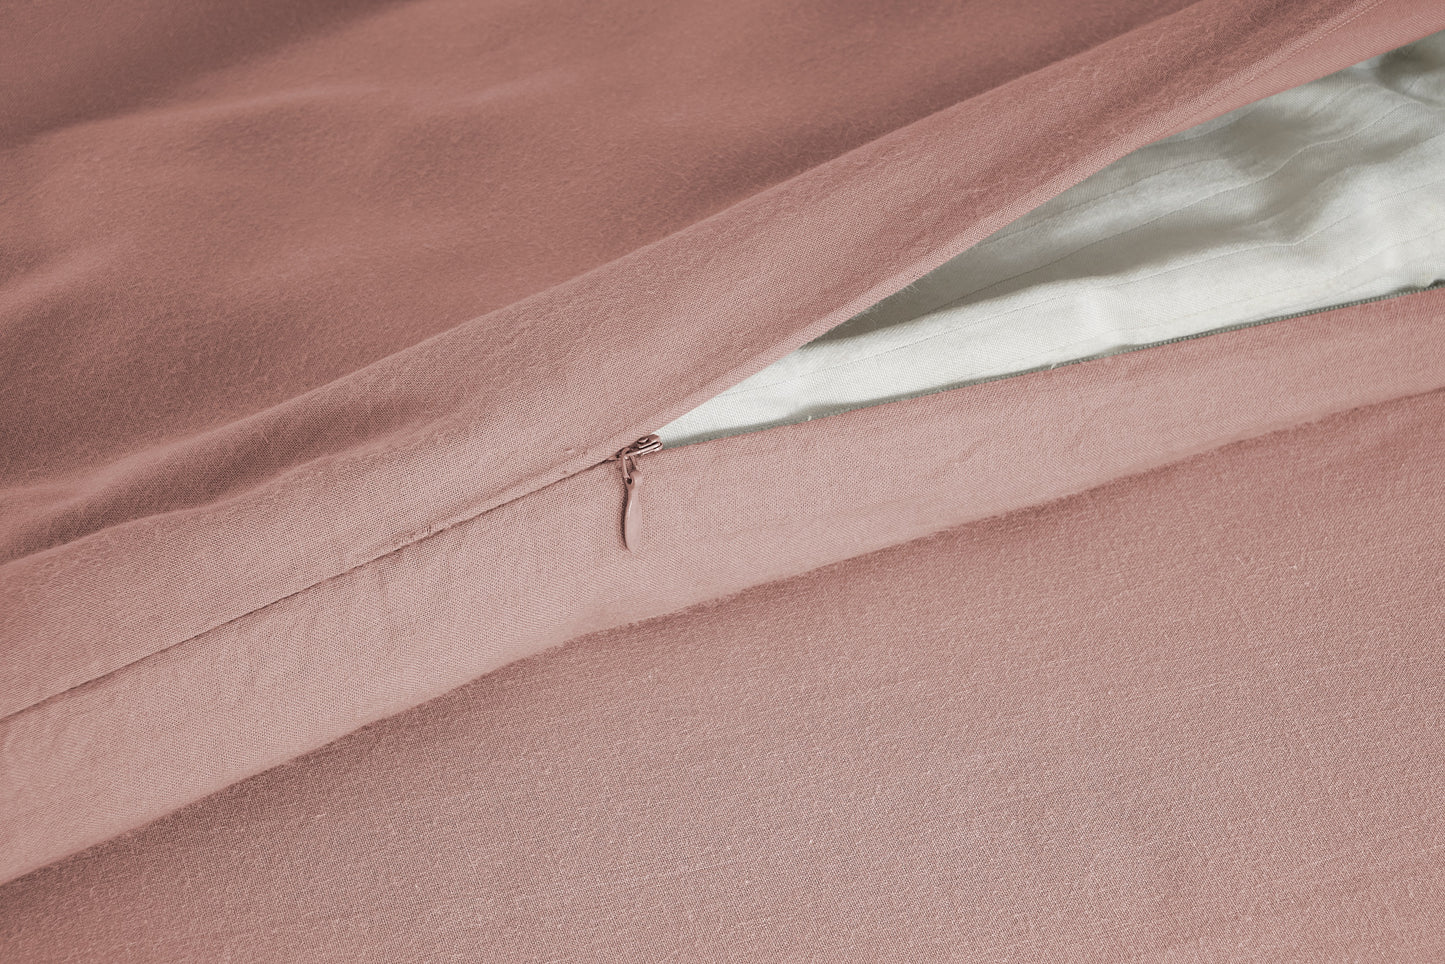 100% Organic Washed Cotton Quilt Cover Set - Sepia Rose